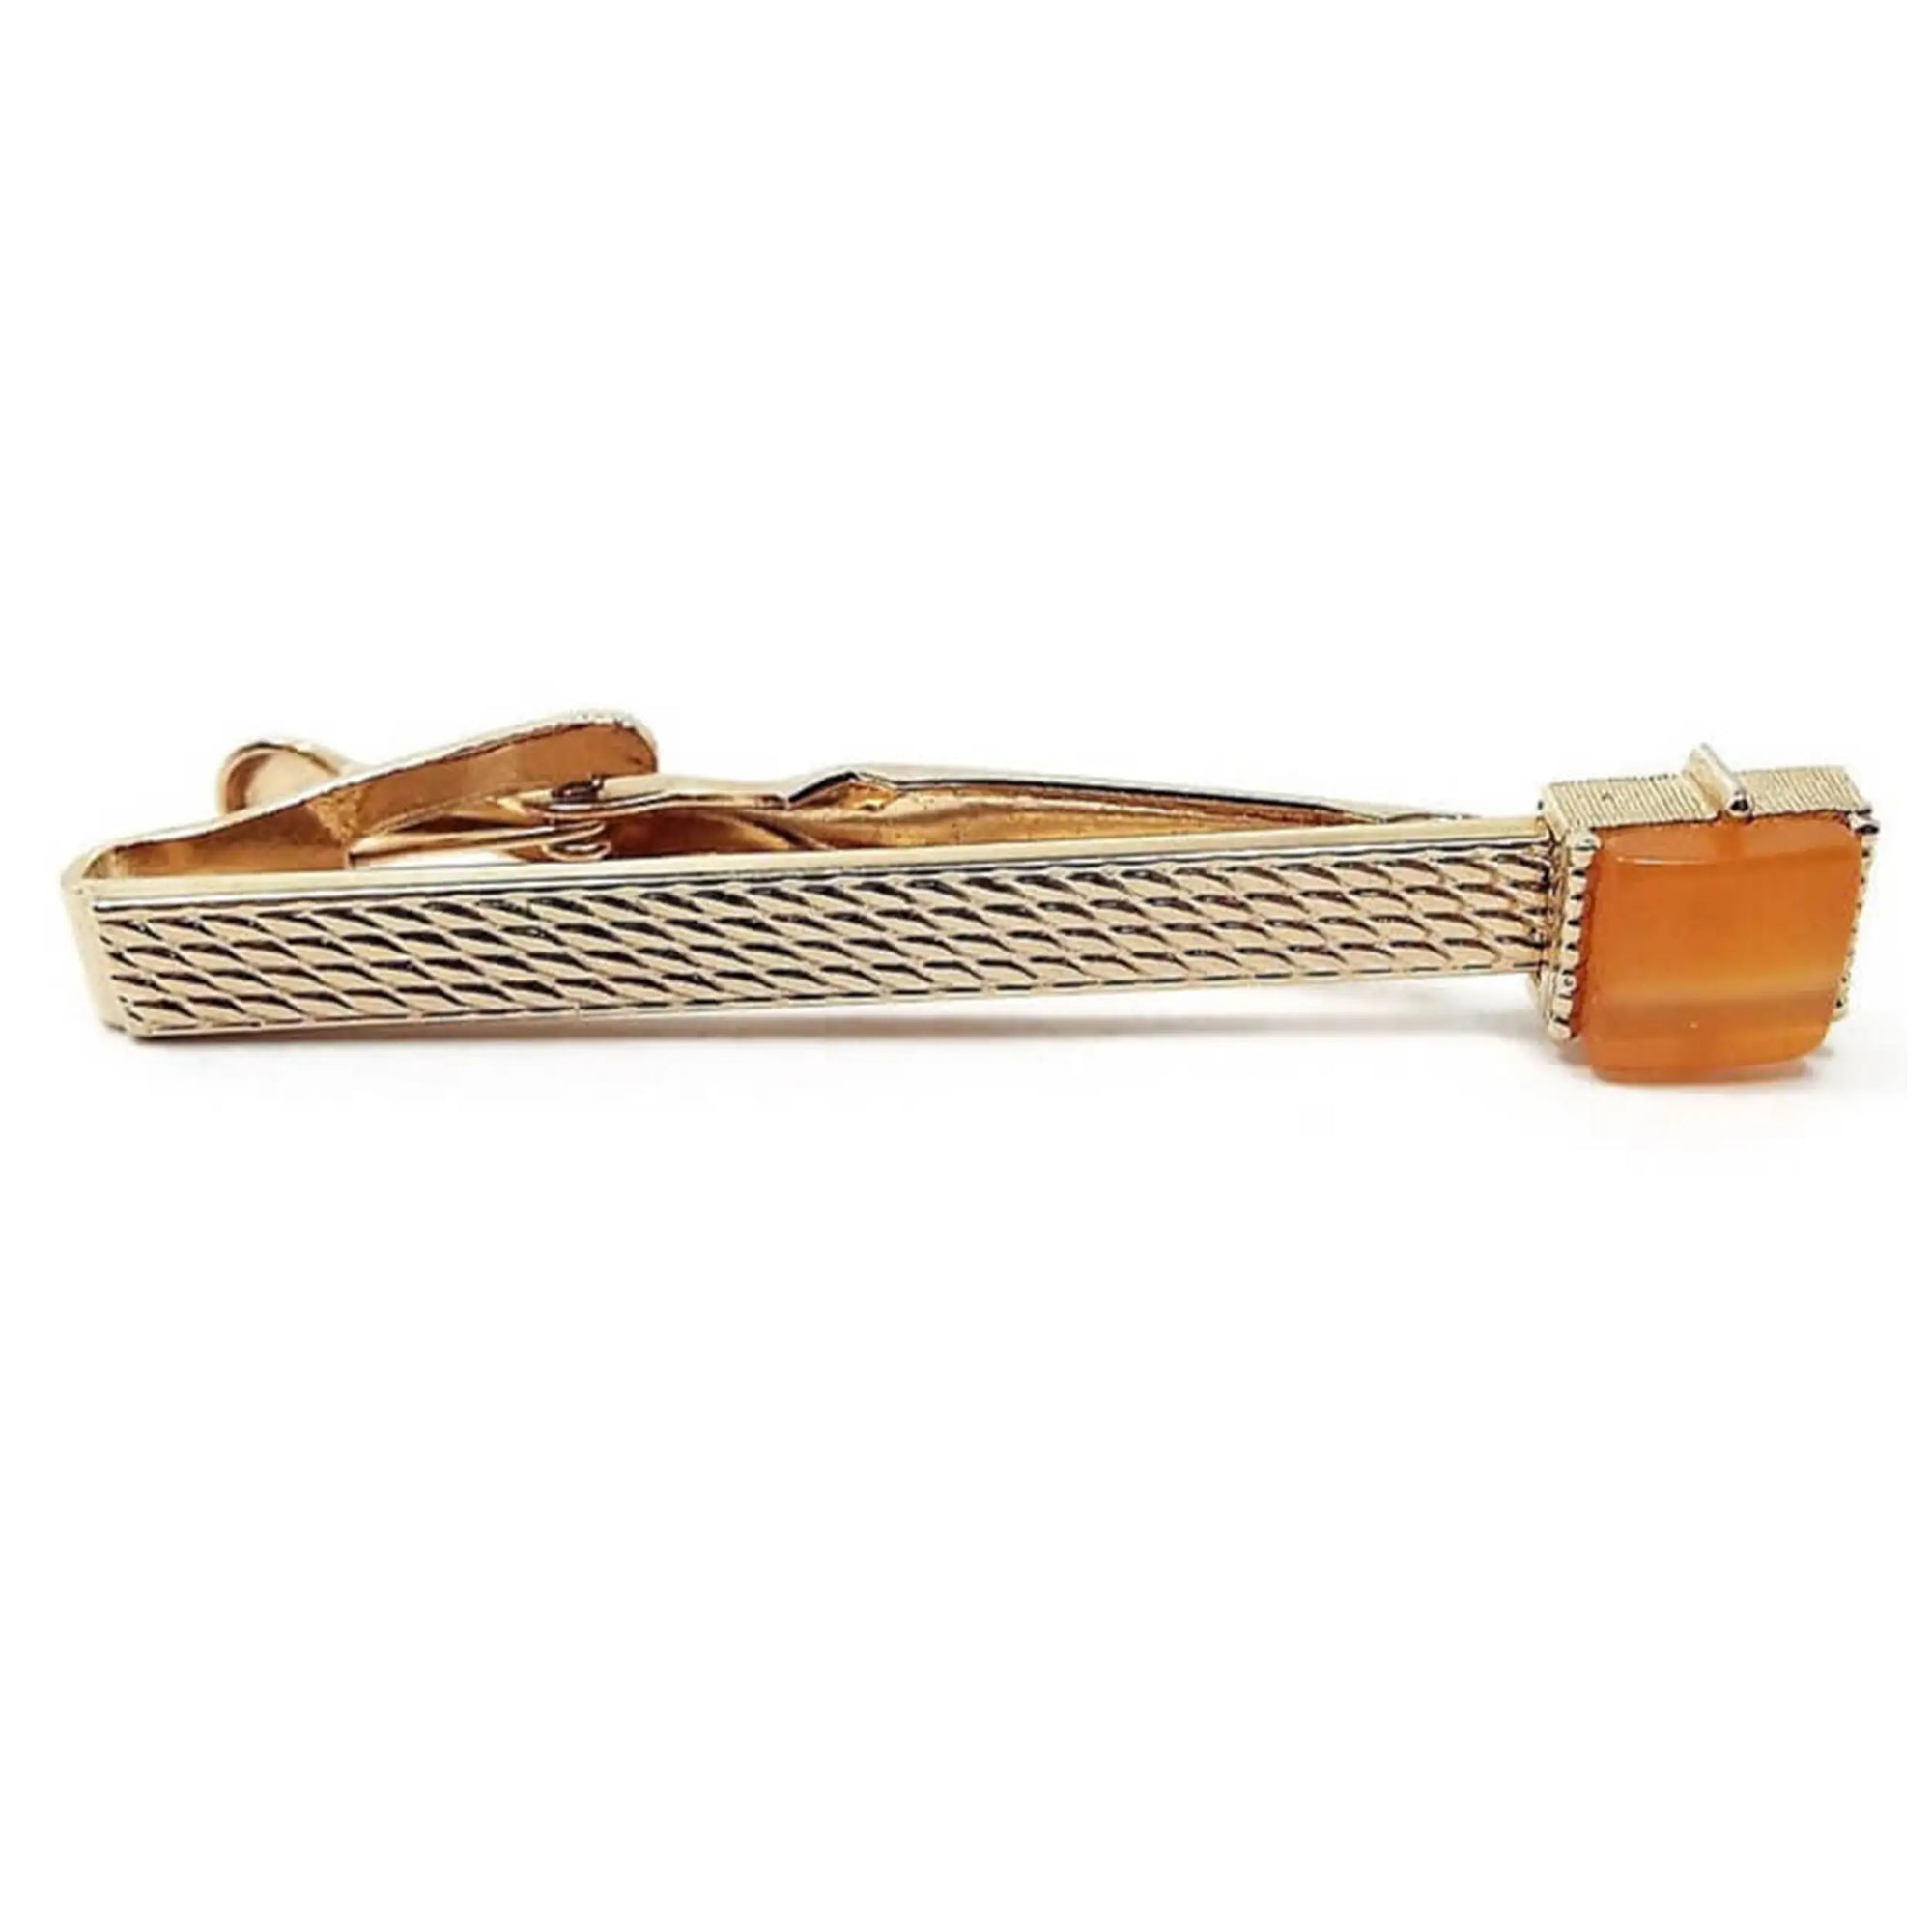 Front view of the Mid Century vintage Swank lucite tie clip. The metal is gold tone in color and has a bump scale like pattern on the front. There is a square orange moonglow lucite cab on the end.